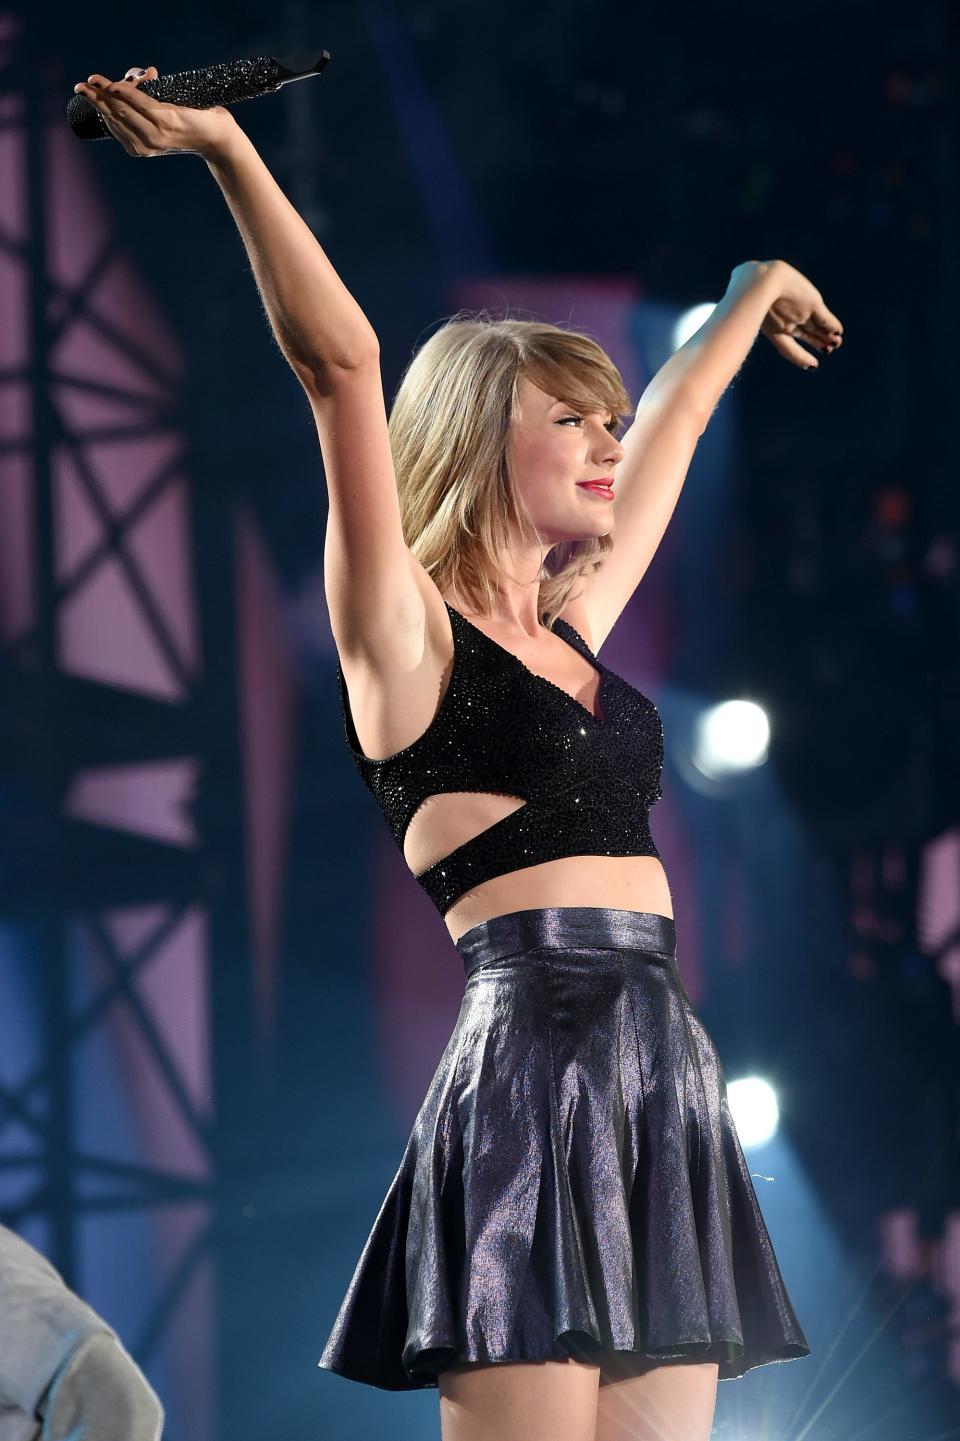 Taylor Swift performs onstage during "The 1989 World Tour" in 2015 at Lincoln Financial Field in Philadelphia.